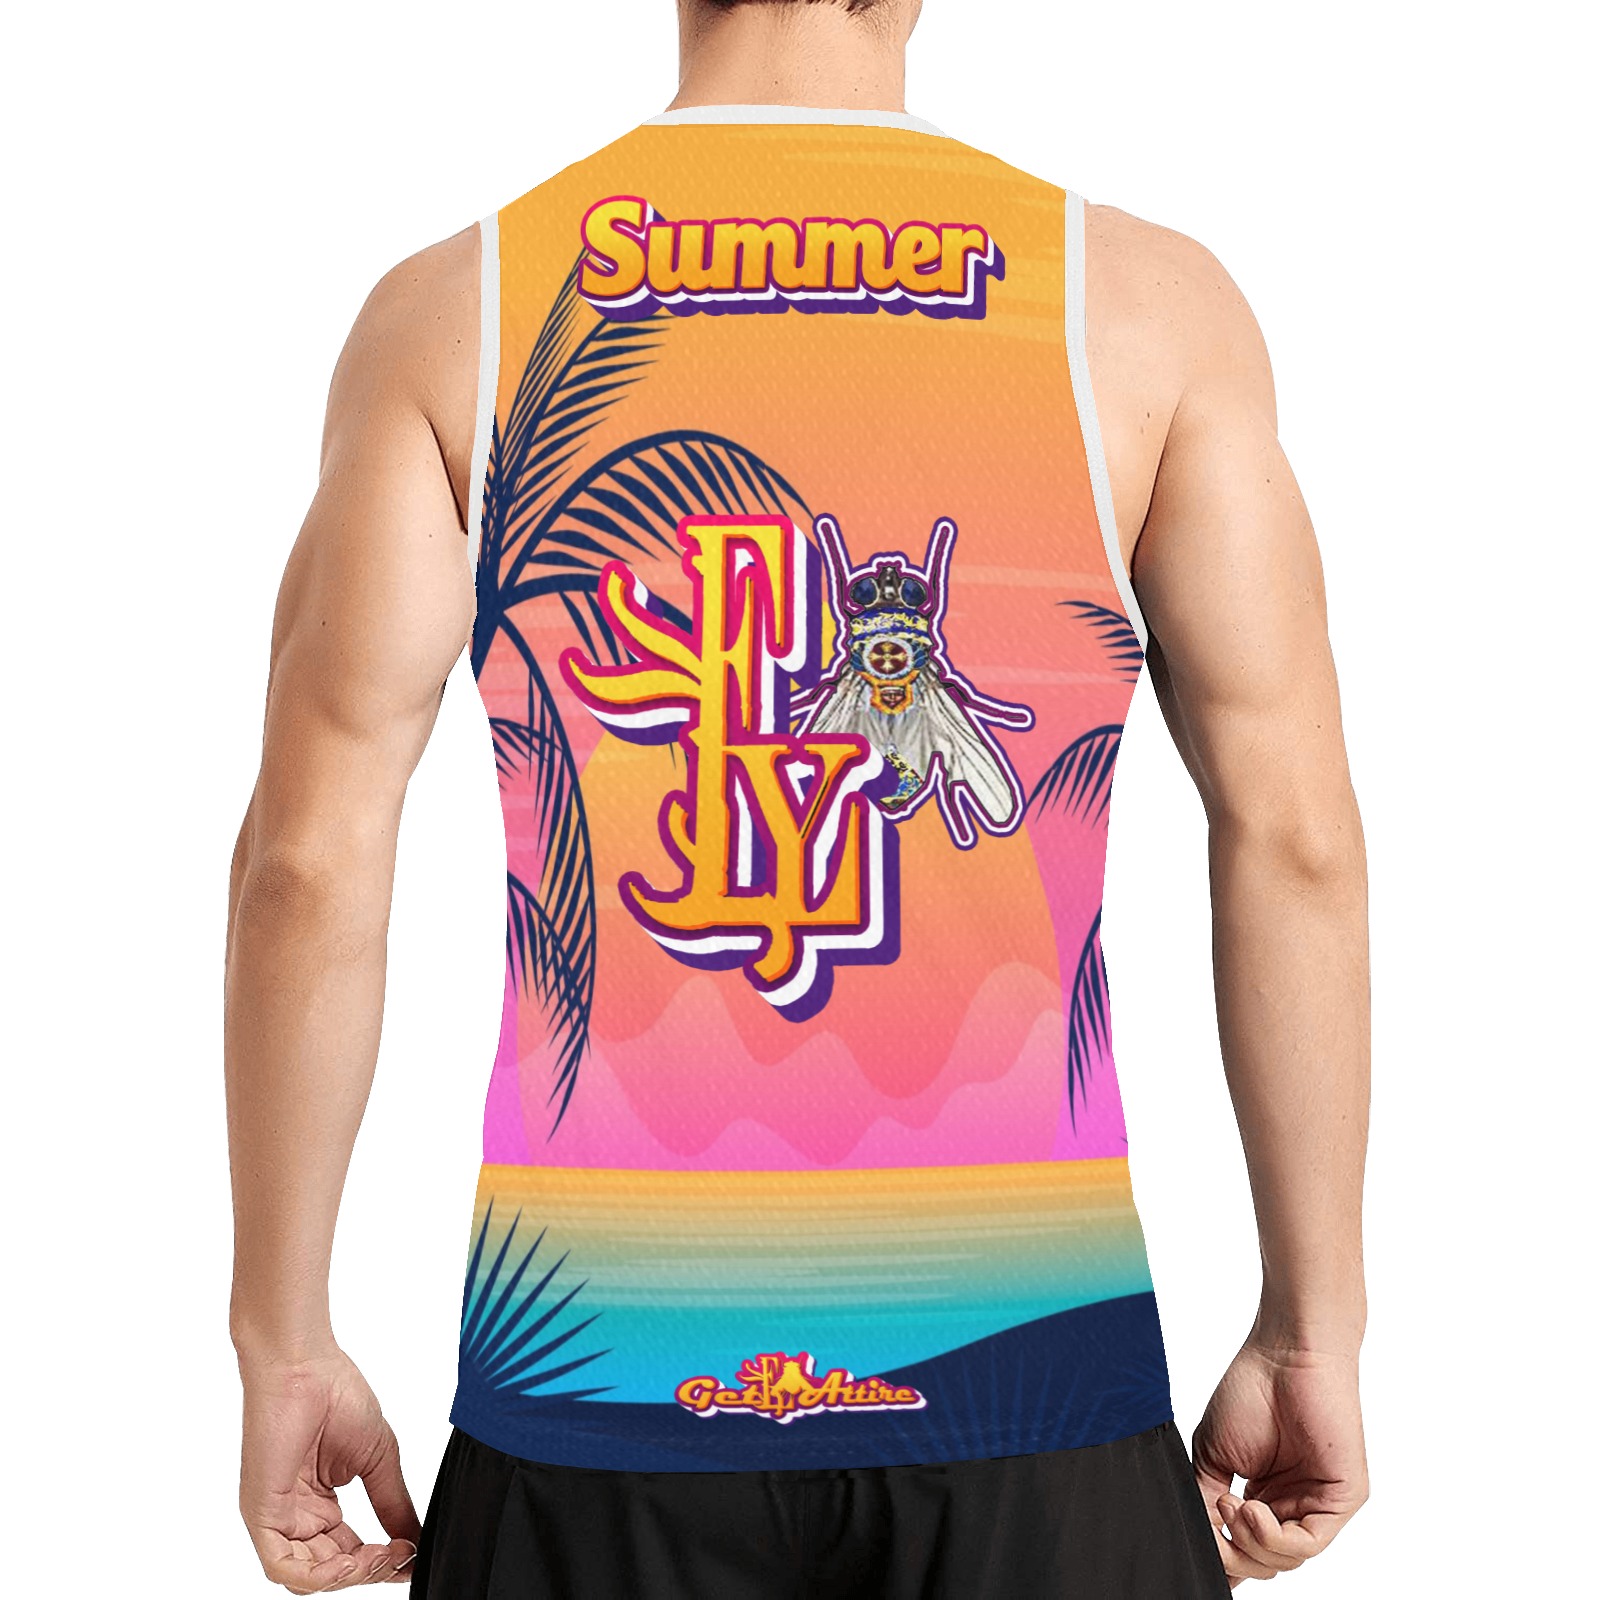 Summer Collectable Fly All Over Print Basketball Jersey